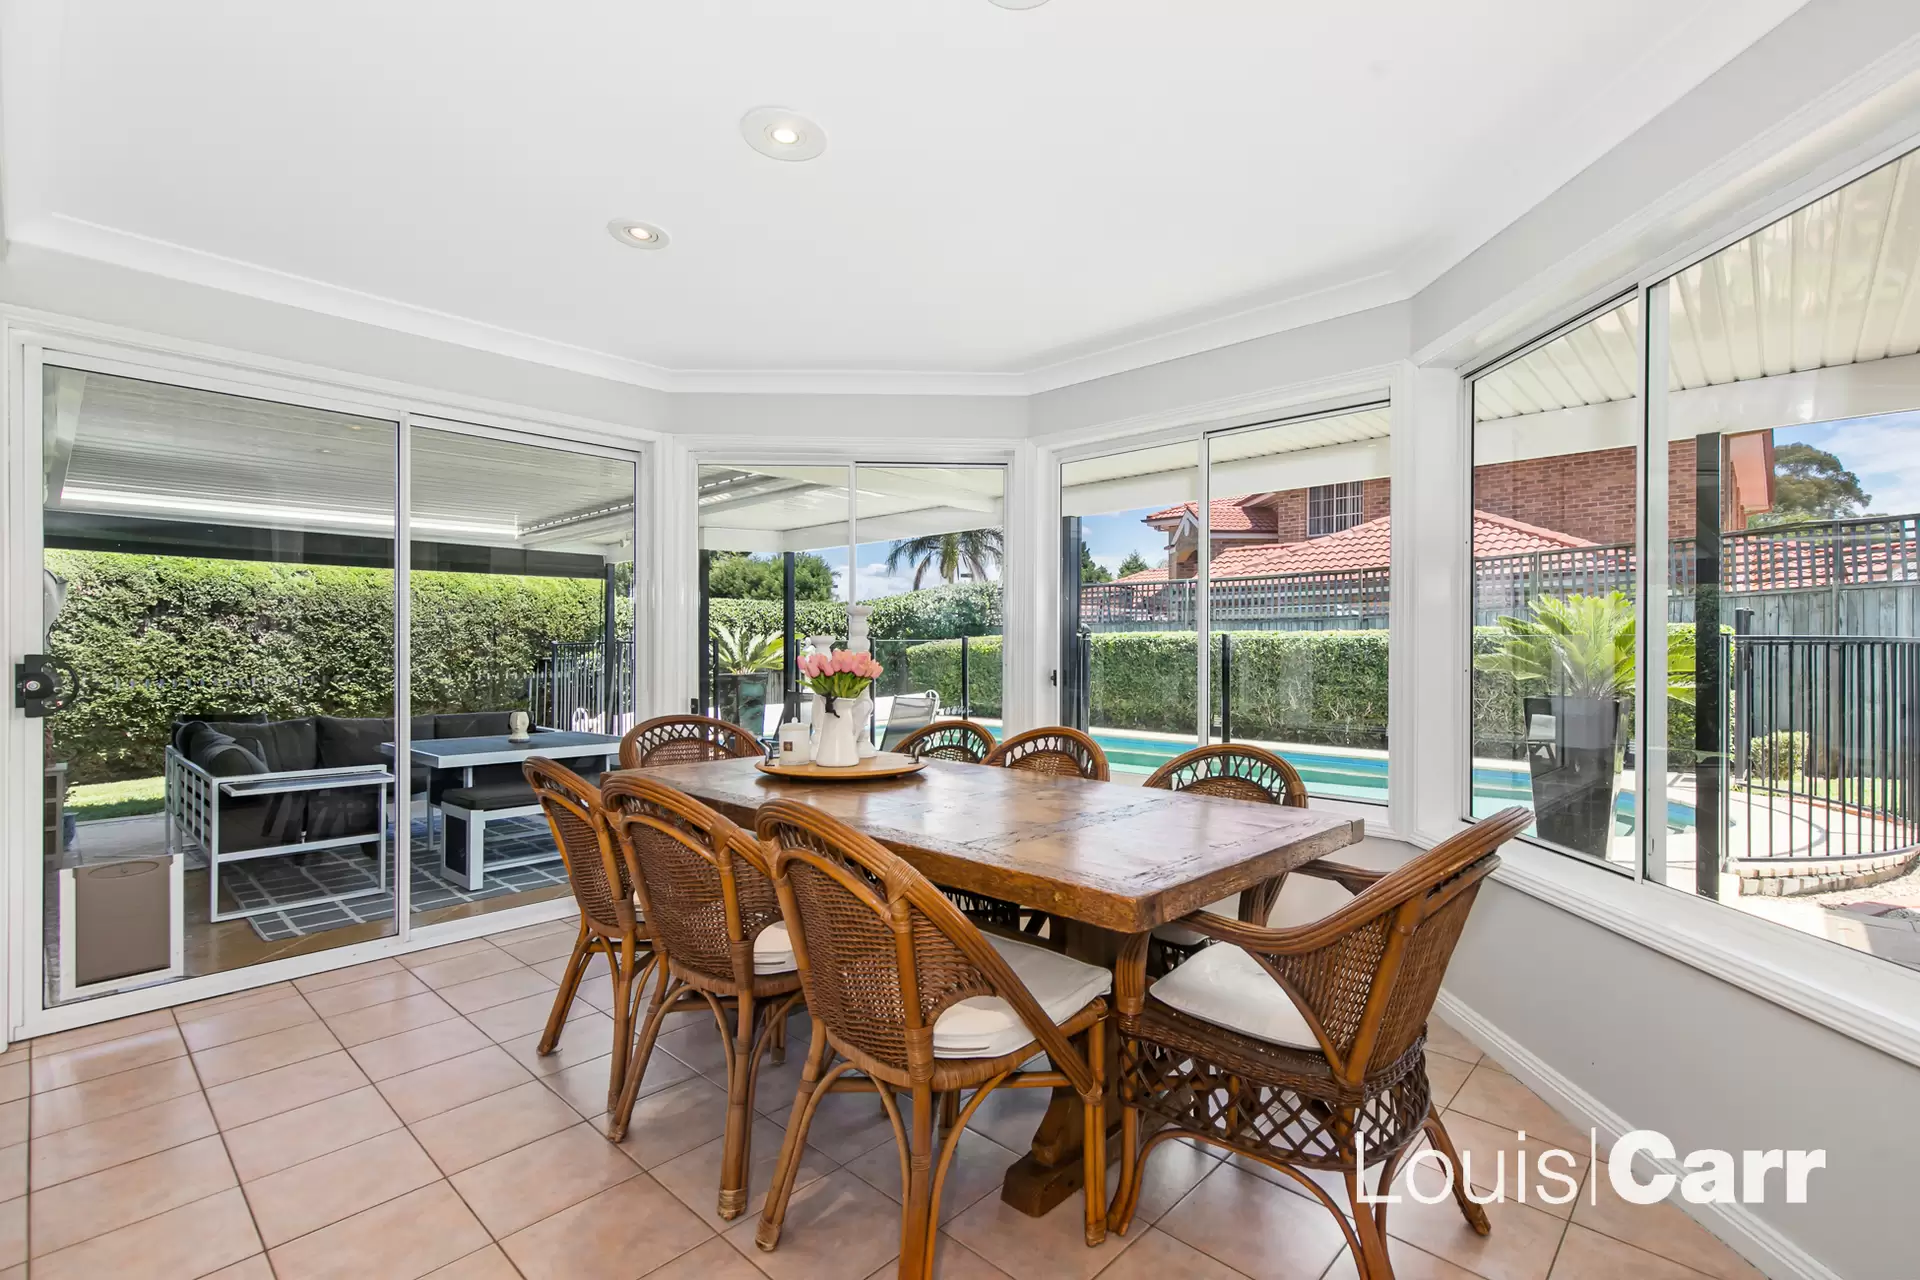 Photo #6: 13 Merelynne Avenue, West Pennant Hills - Sold by Louis Carr Real Estate